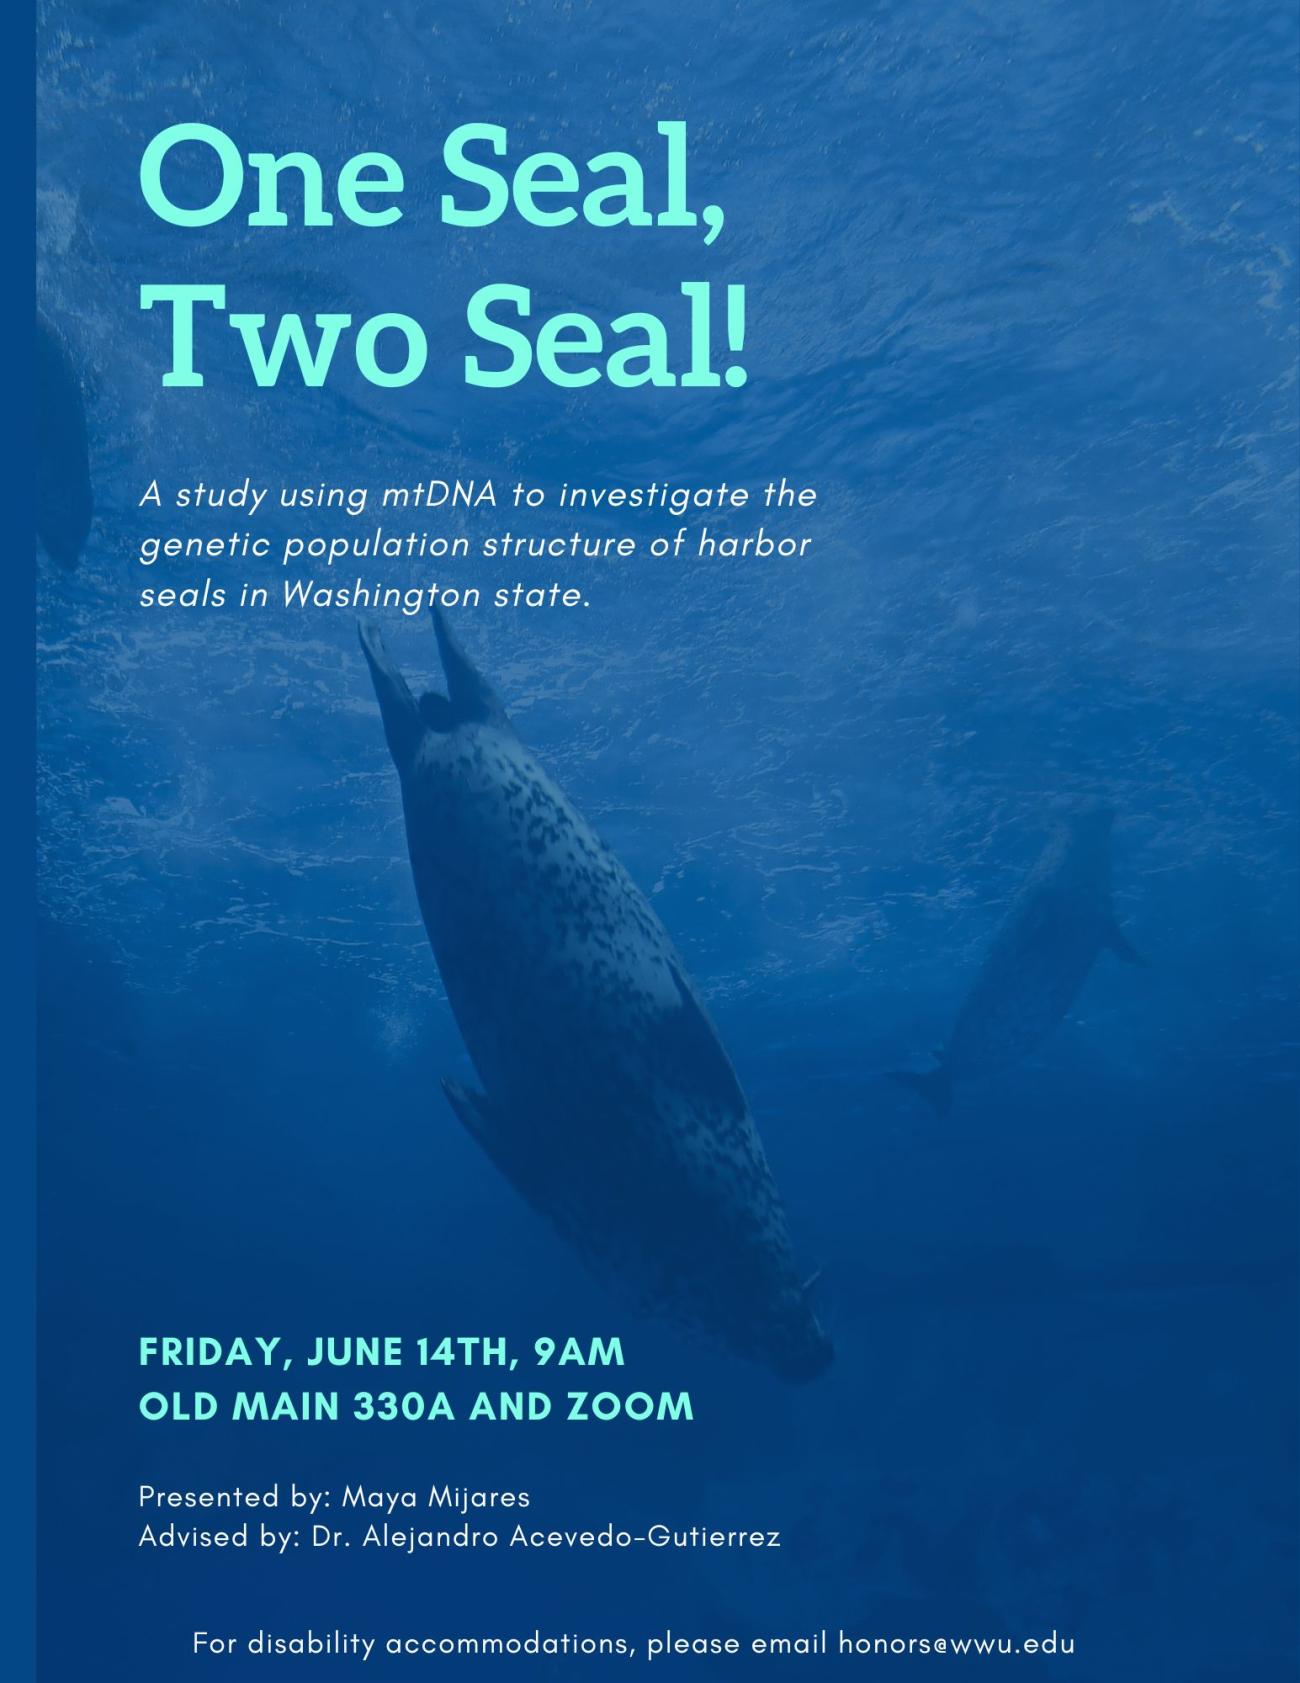 A blue, watery background with two harbor seals swimming underwater. The text reads "One seal, two seal! A study using mtDNA to investigate the genetic population structure of harbor seals in Washington State. Friday, June 14th, 9 am, Old Main 330A and Zoom. Presented by: Maya Mijares, Advised by: Dr. Alejandro Acevedo-Gutierrez. For disability accommodations, please email honors@wwu.edu."